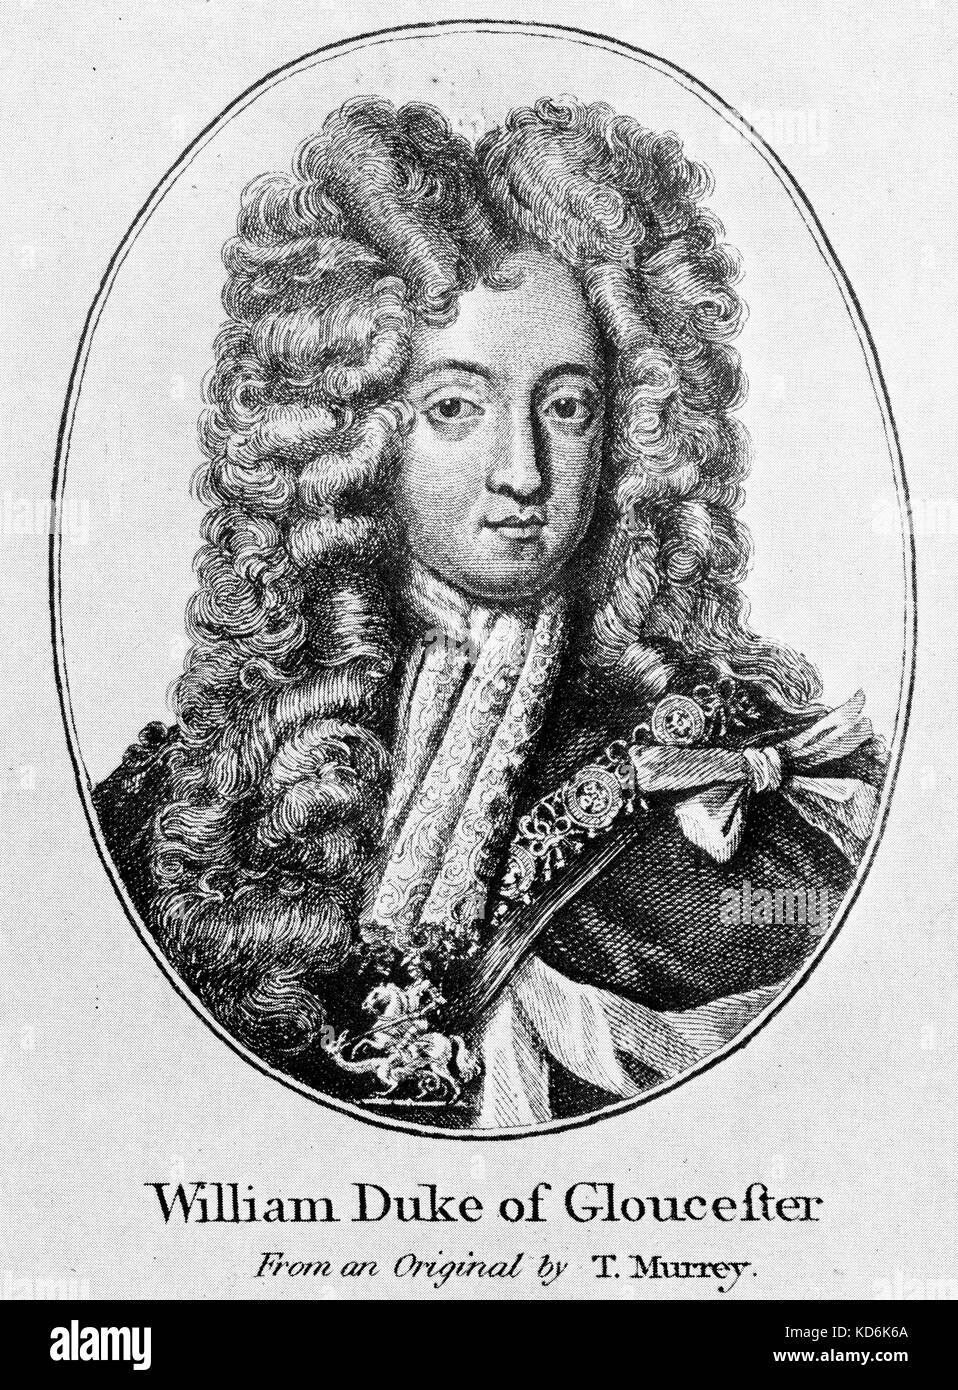 William Duke of Gloucester (1689-1700) from an original by T. Murrey.  Signed by William. Purcell connection. Stock Photo